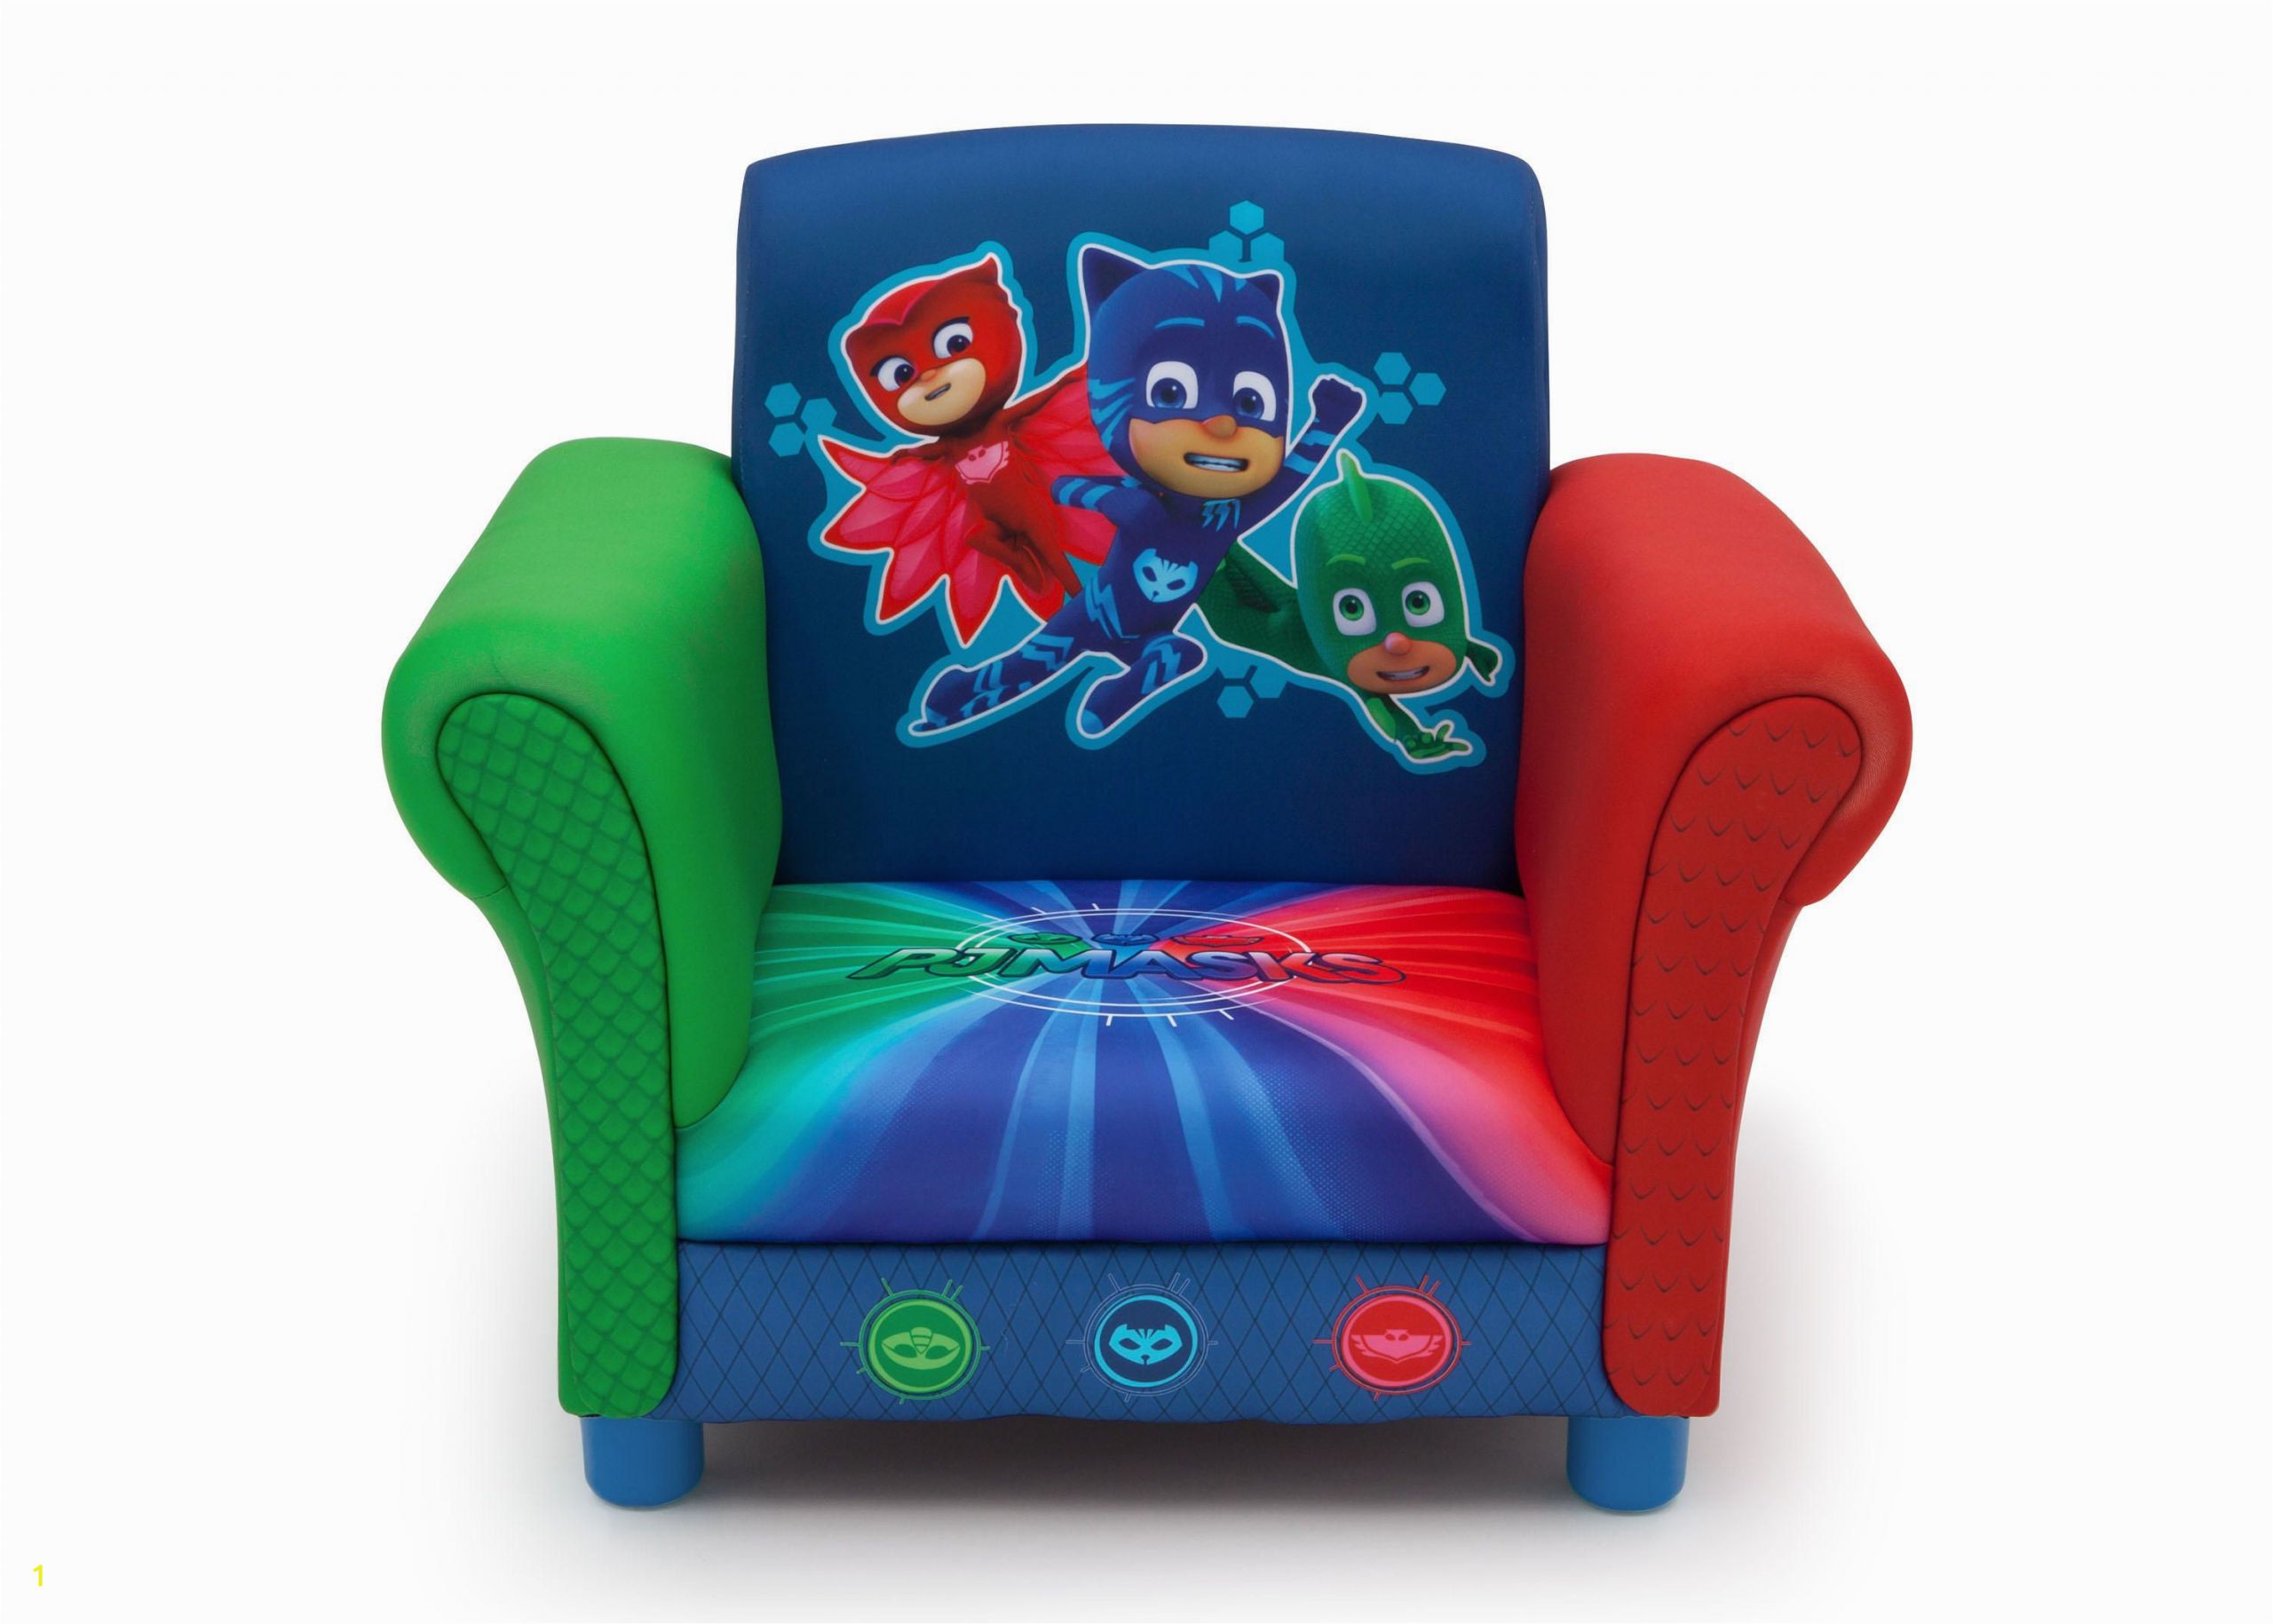 Pj Mask Wall Mural Pin by Babylist Eng On Prod In 2019